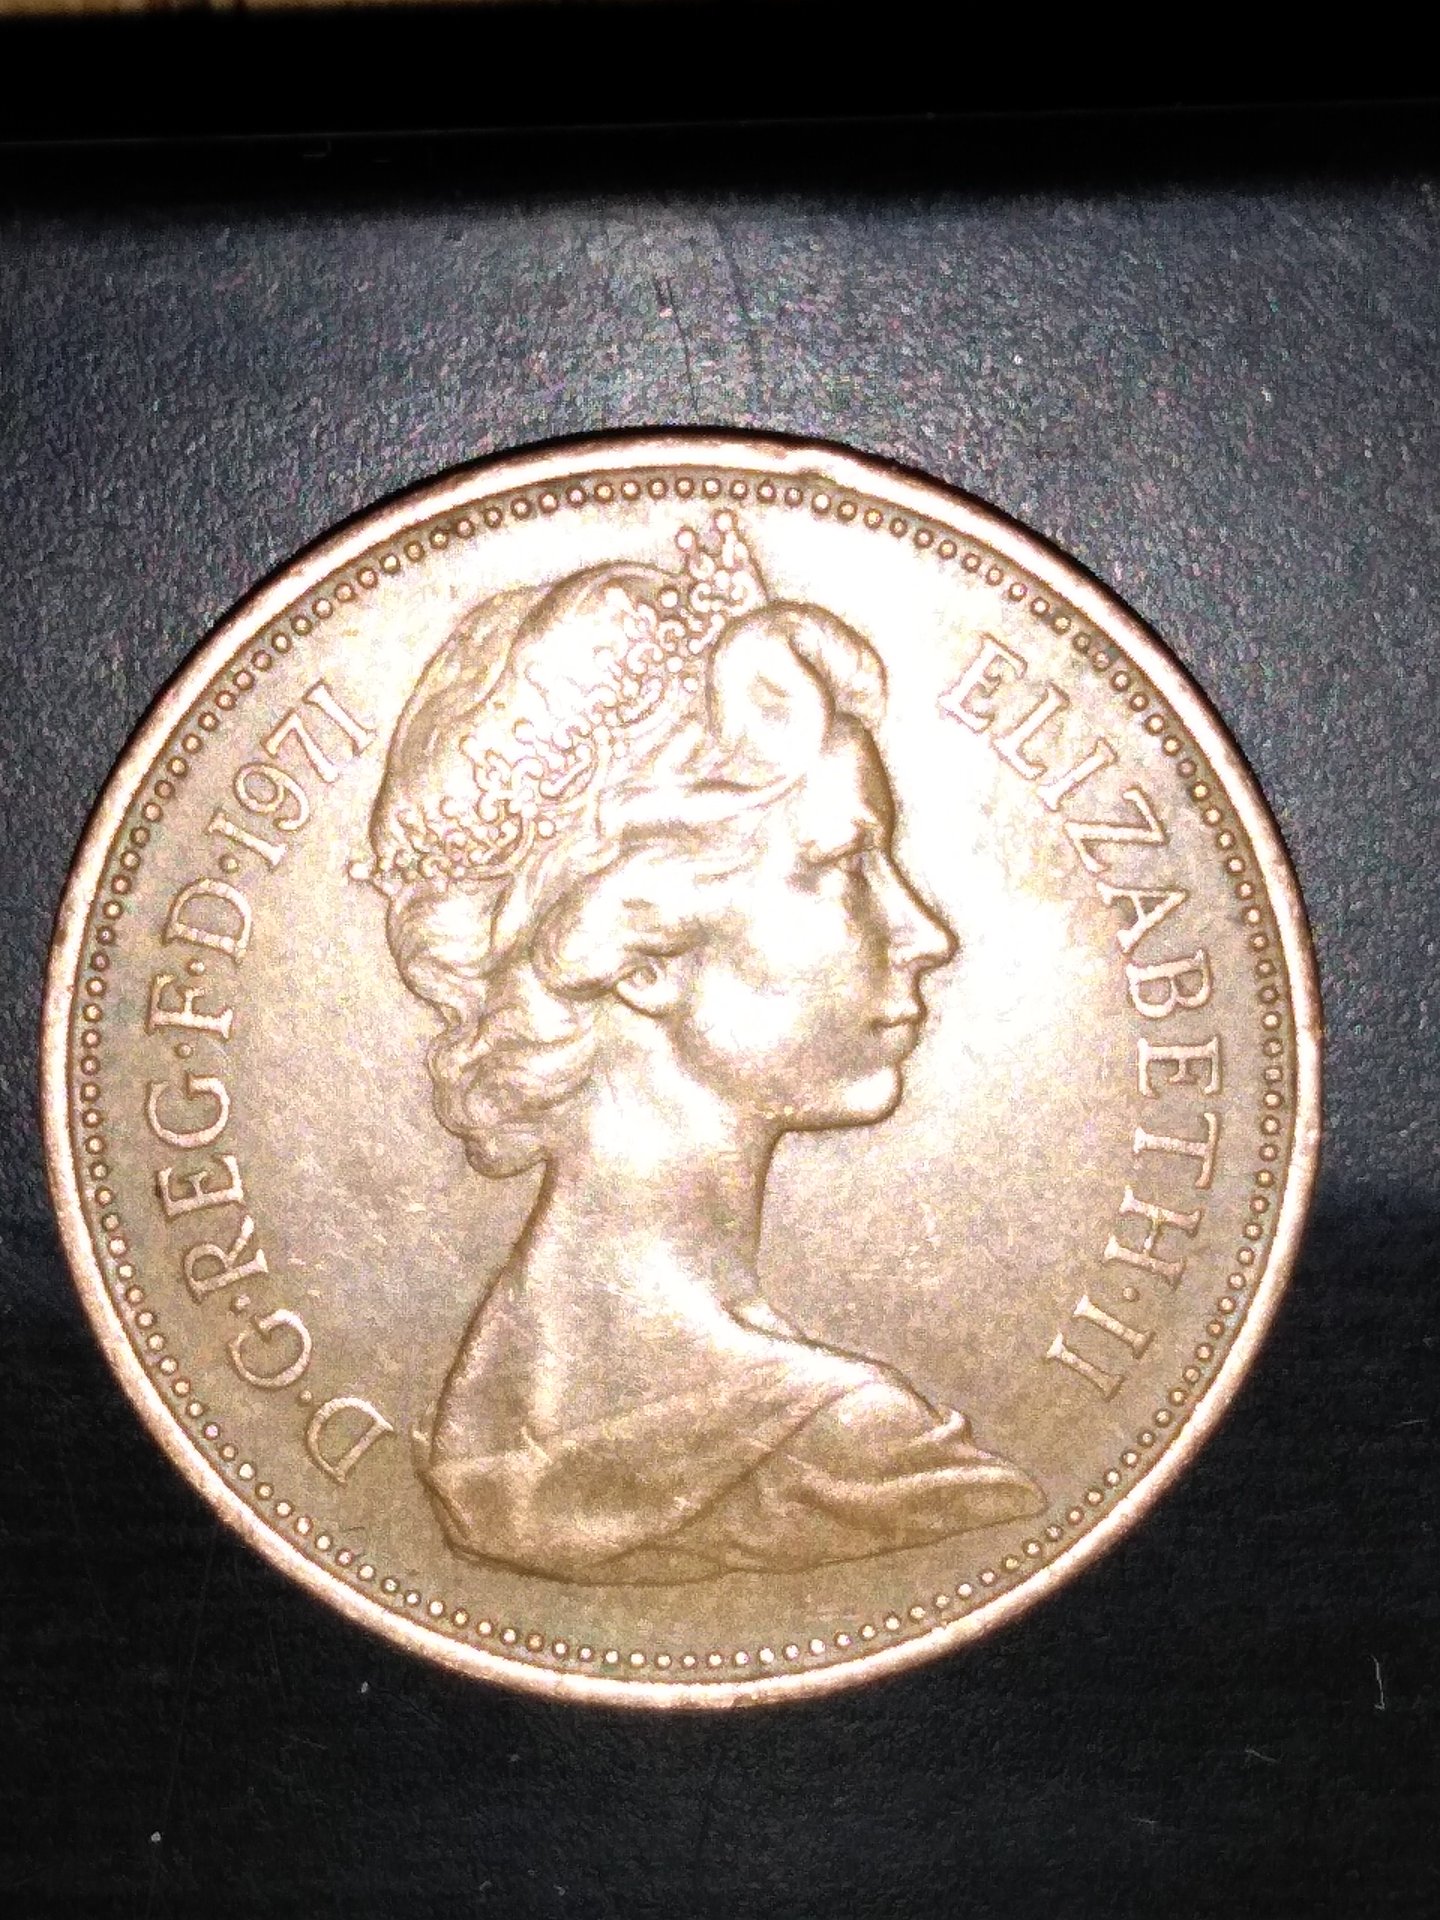 1971 new pence elizabeth ii value place forex margin call stop out lesbophobia